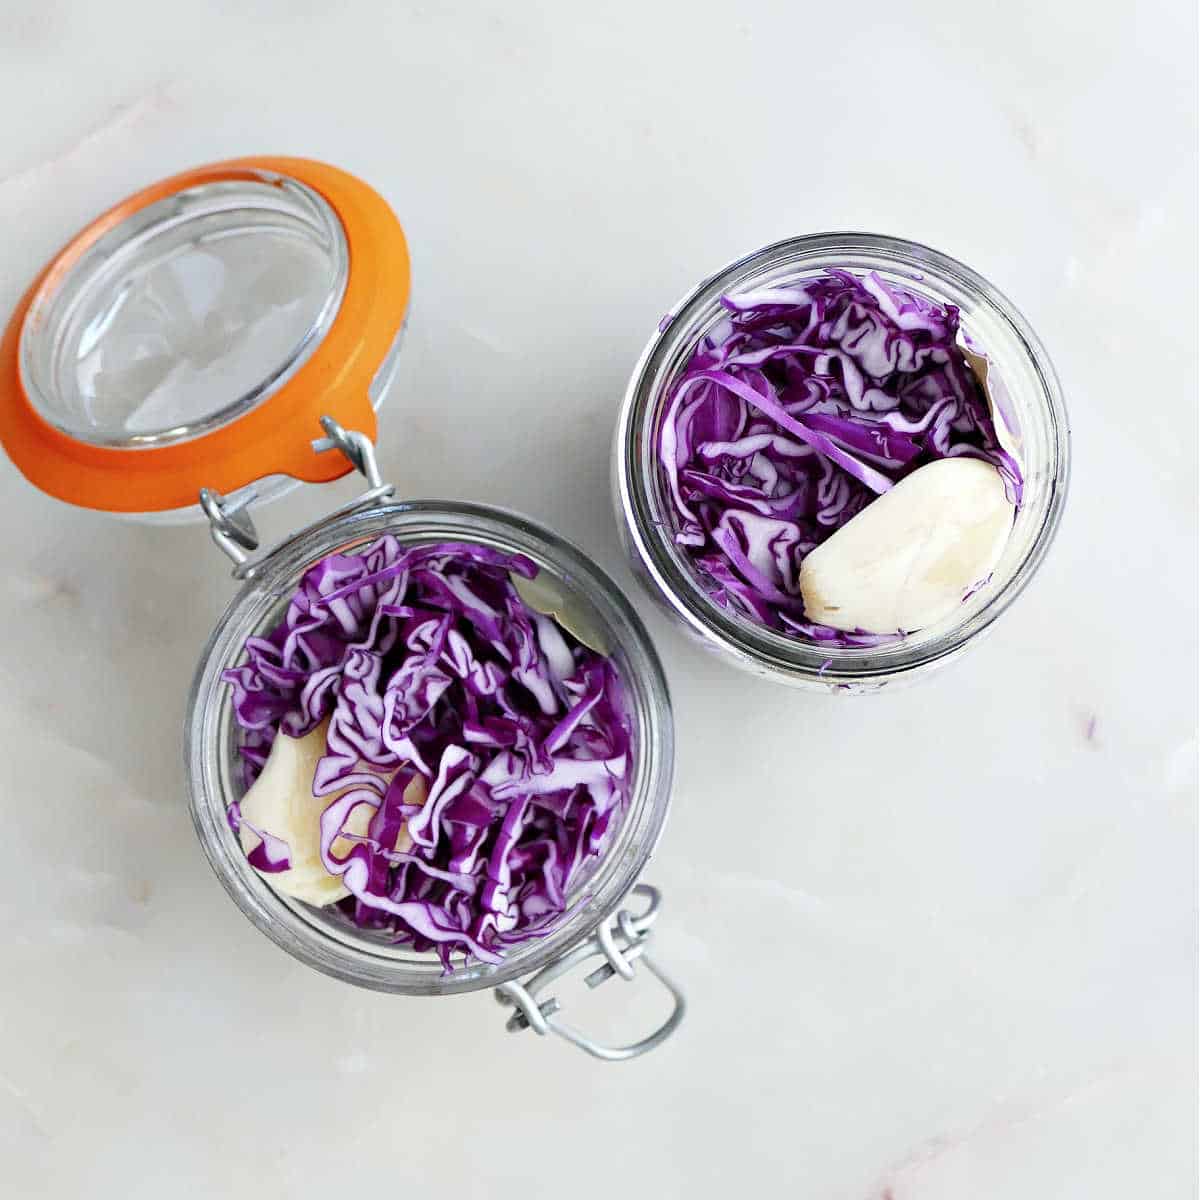 Two glass jars stuffed with red cabbage and garlic before adding brine.